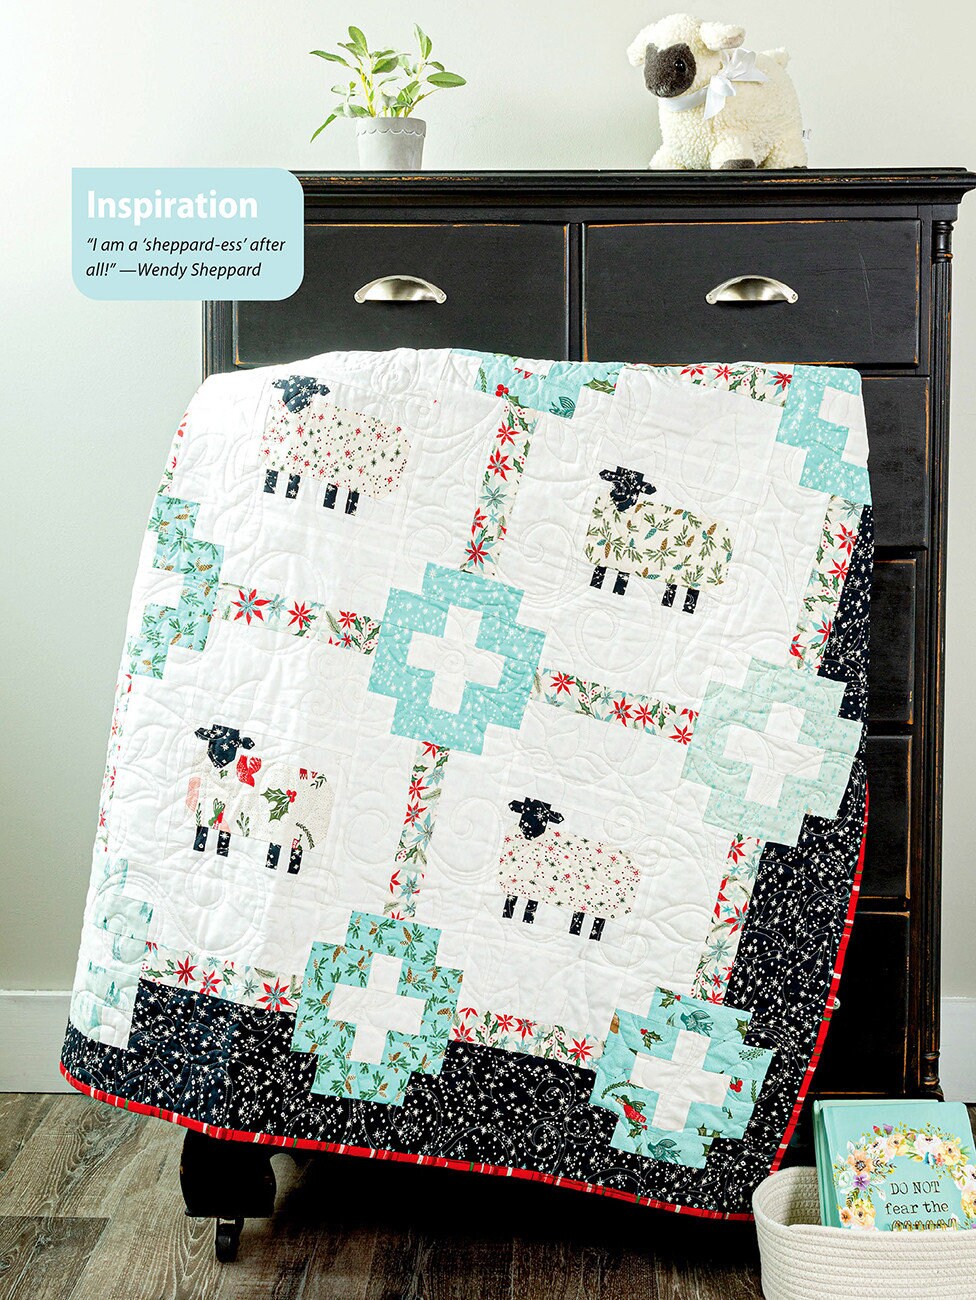 Christmas Quilting with Wendy Sheppard Quilt Pattern Book, Annie's 1415201, 9 Holiday Projects, Christmas Xmas Quilt Patterns